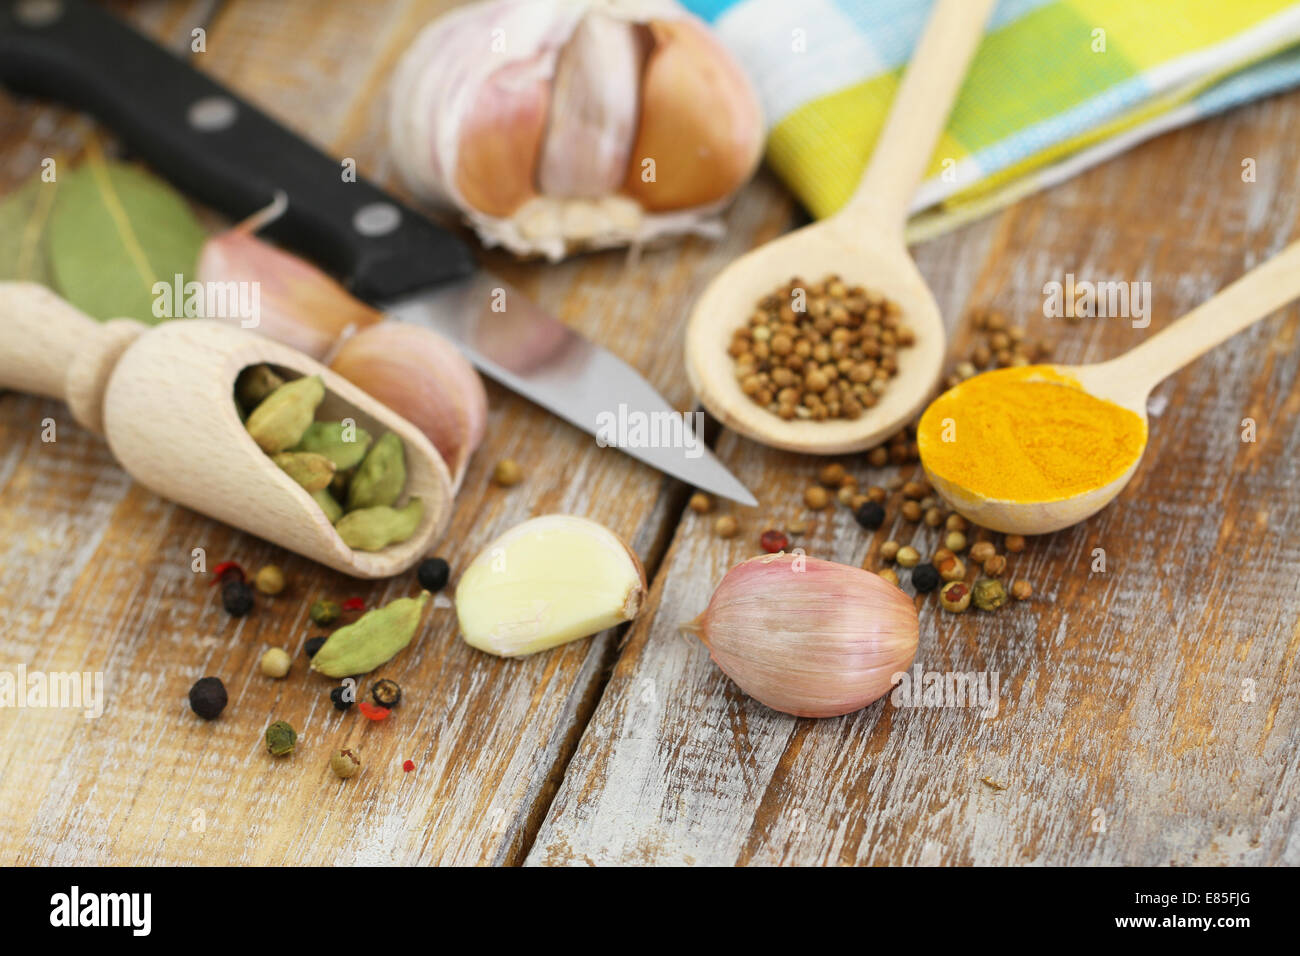 Garlic and other cooking ingredients and spices on wooden surface Stock Photo